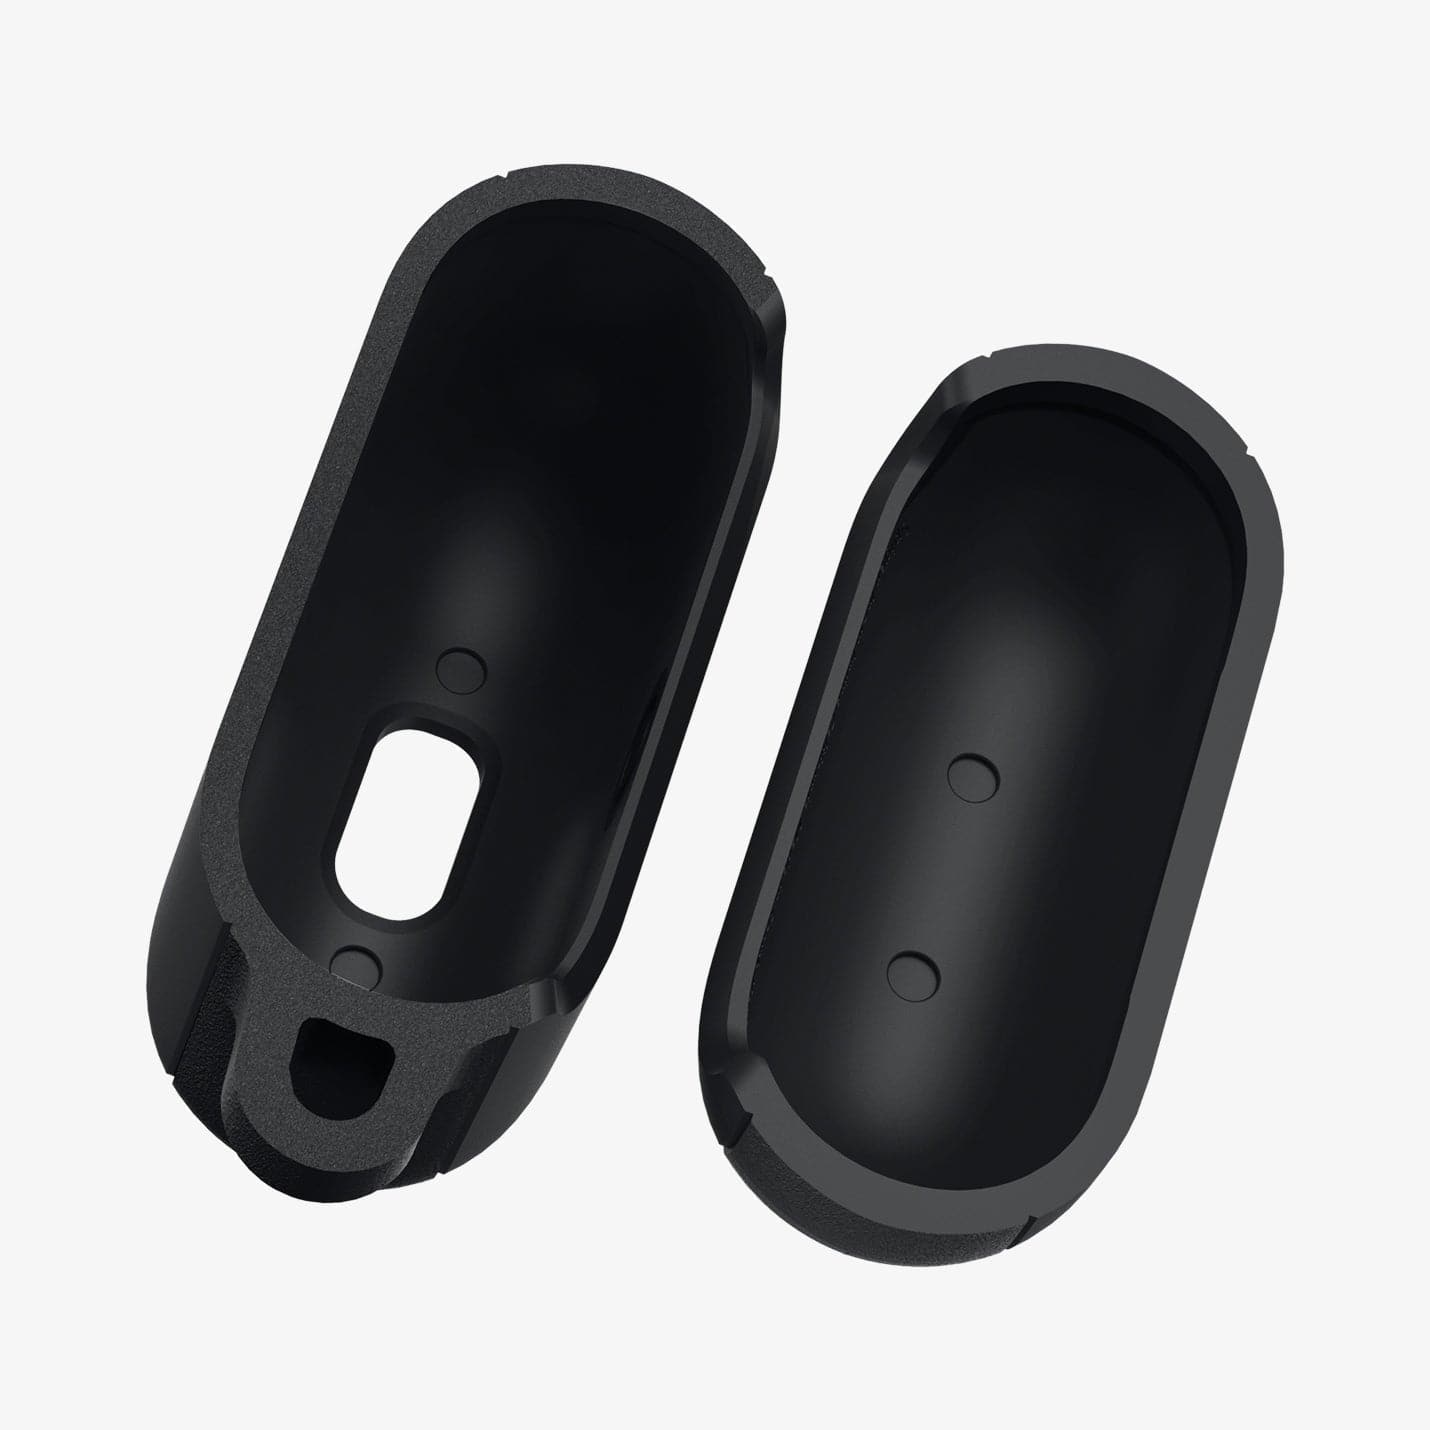 ASD01984 - Apple AirPods 3 Case Silicone Fit in black showing the inside of case